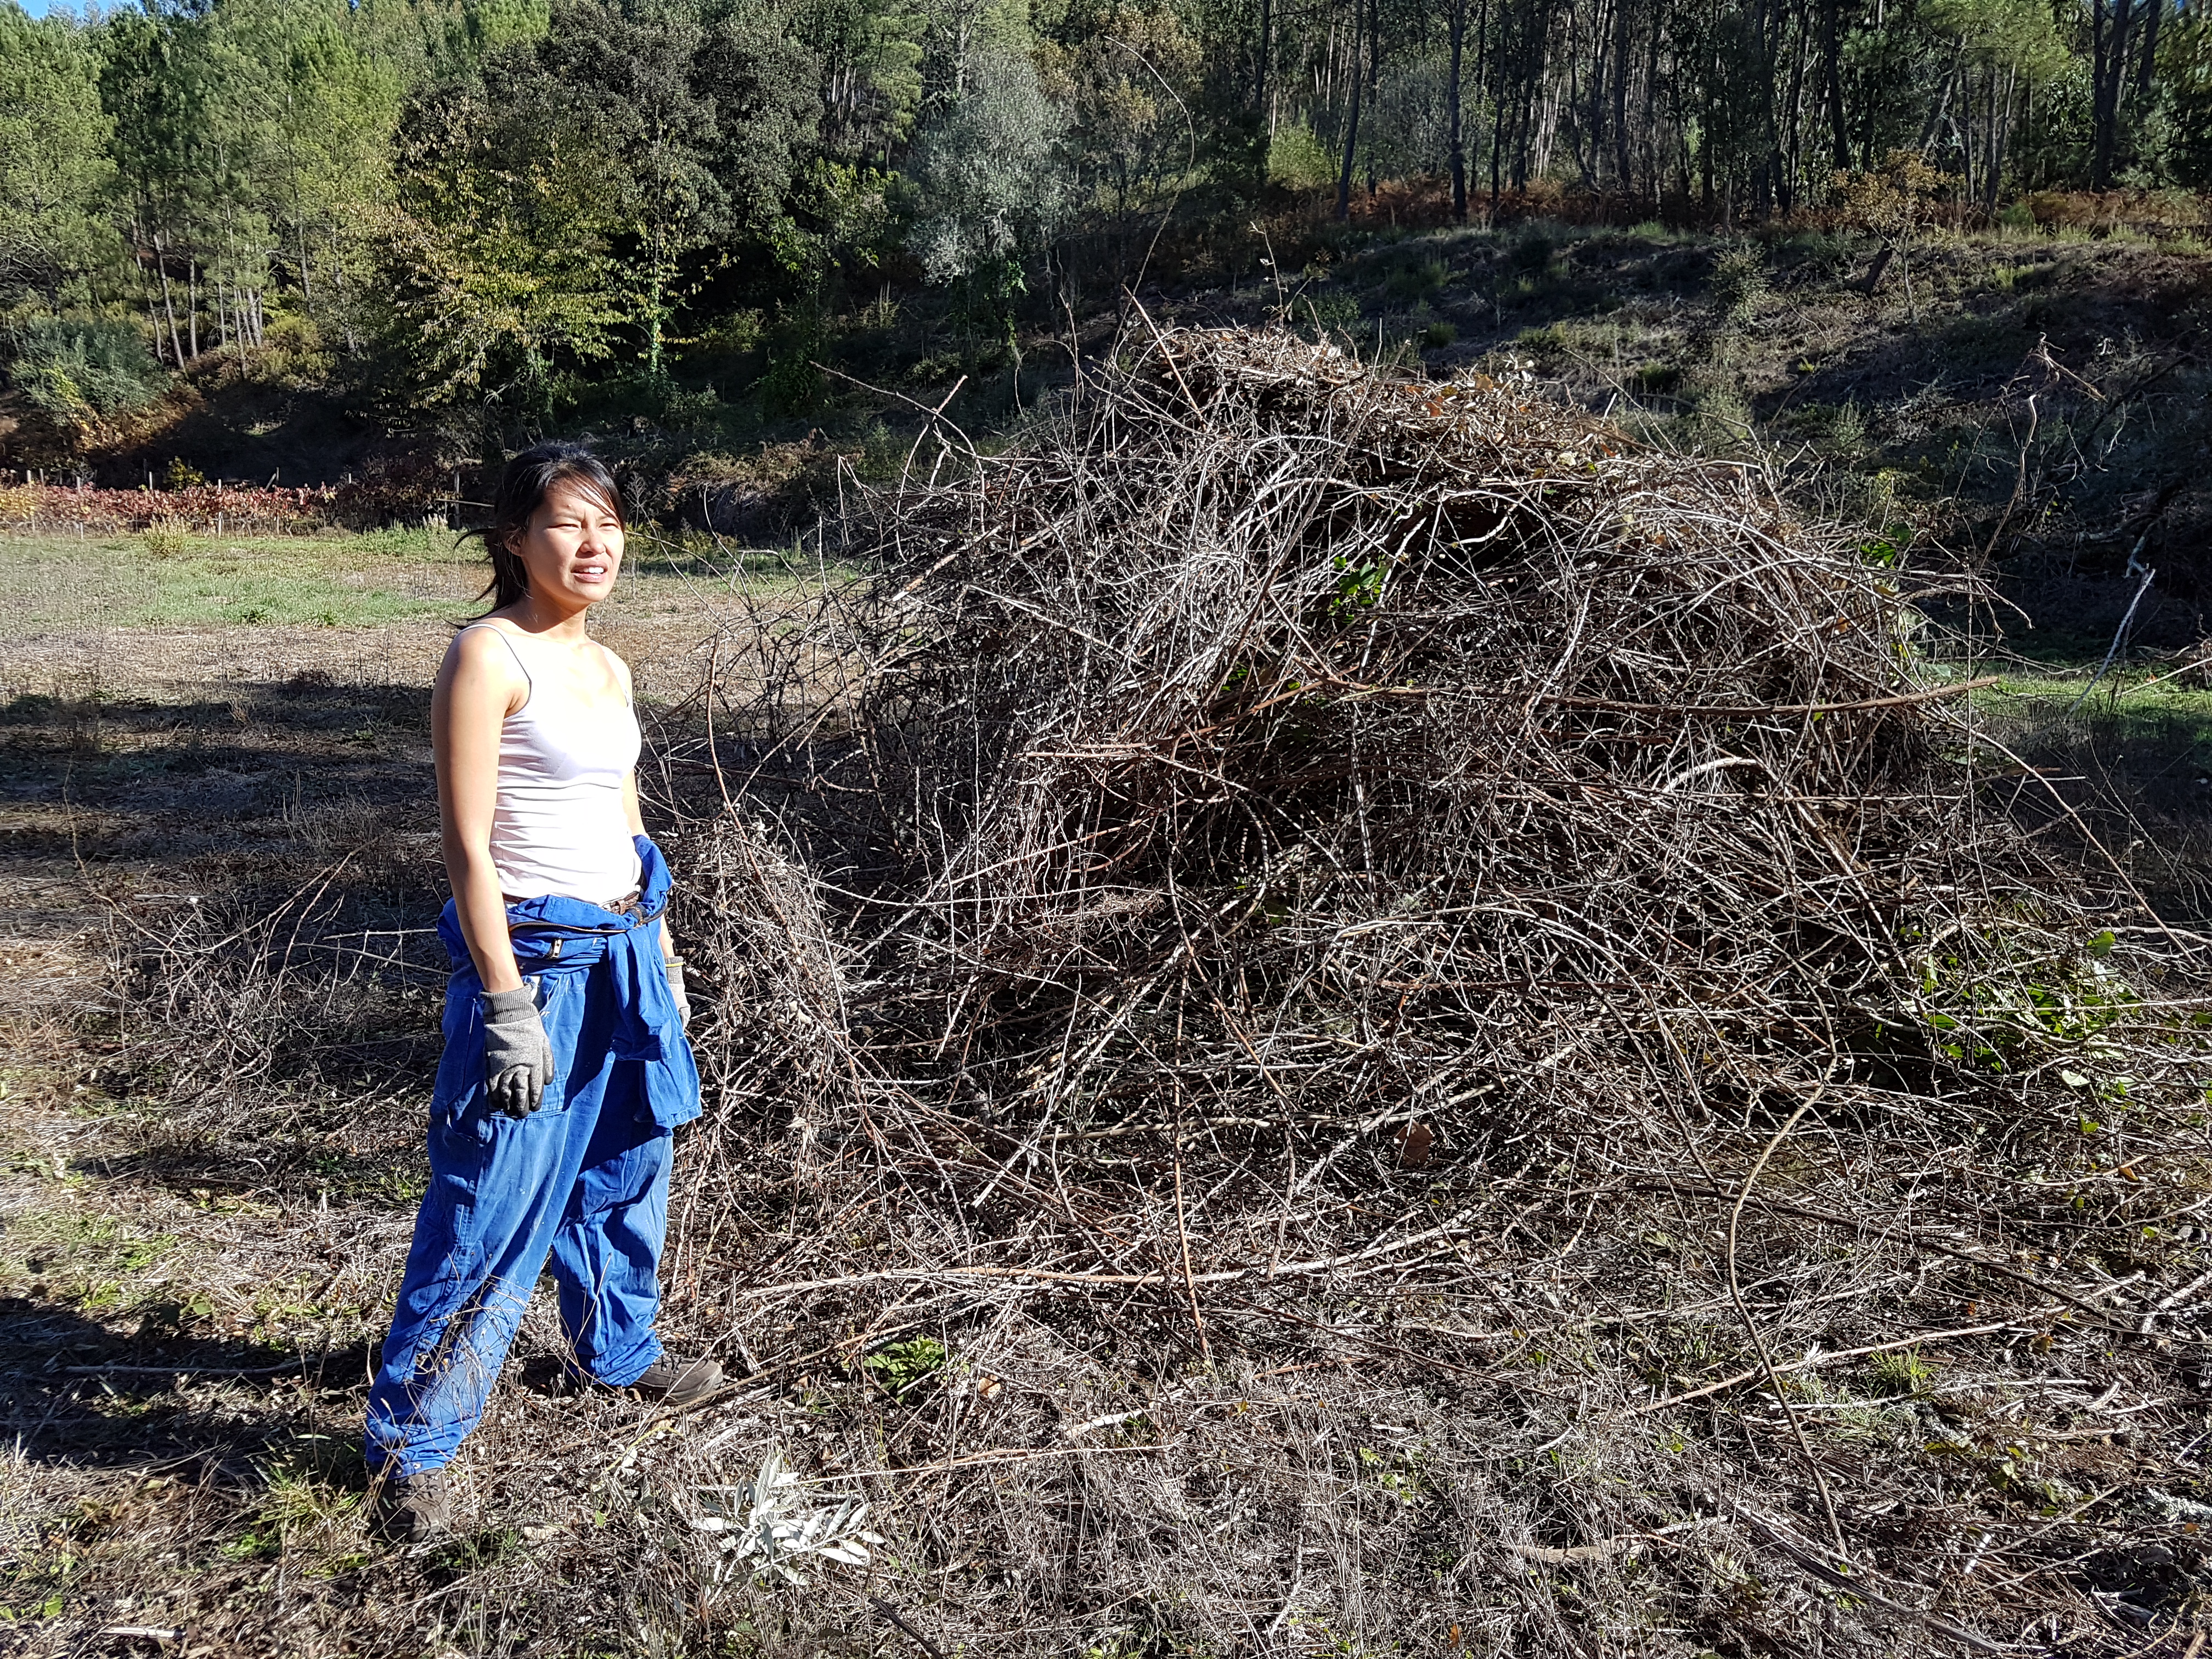 After the last day in the olive yard, Marilisa left the heap of bramble branches even higher than in the photo.